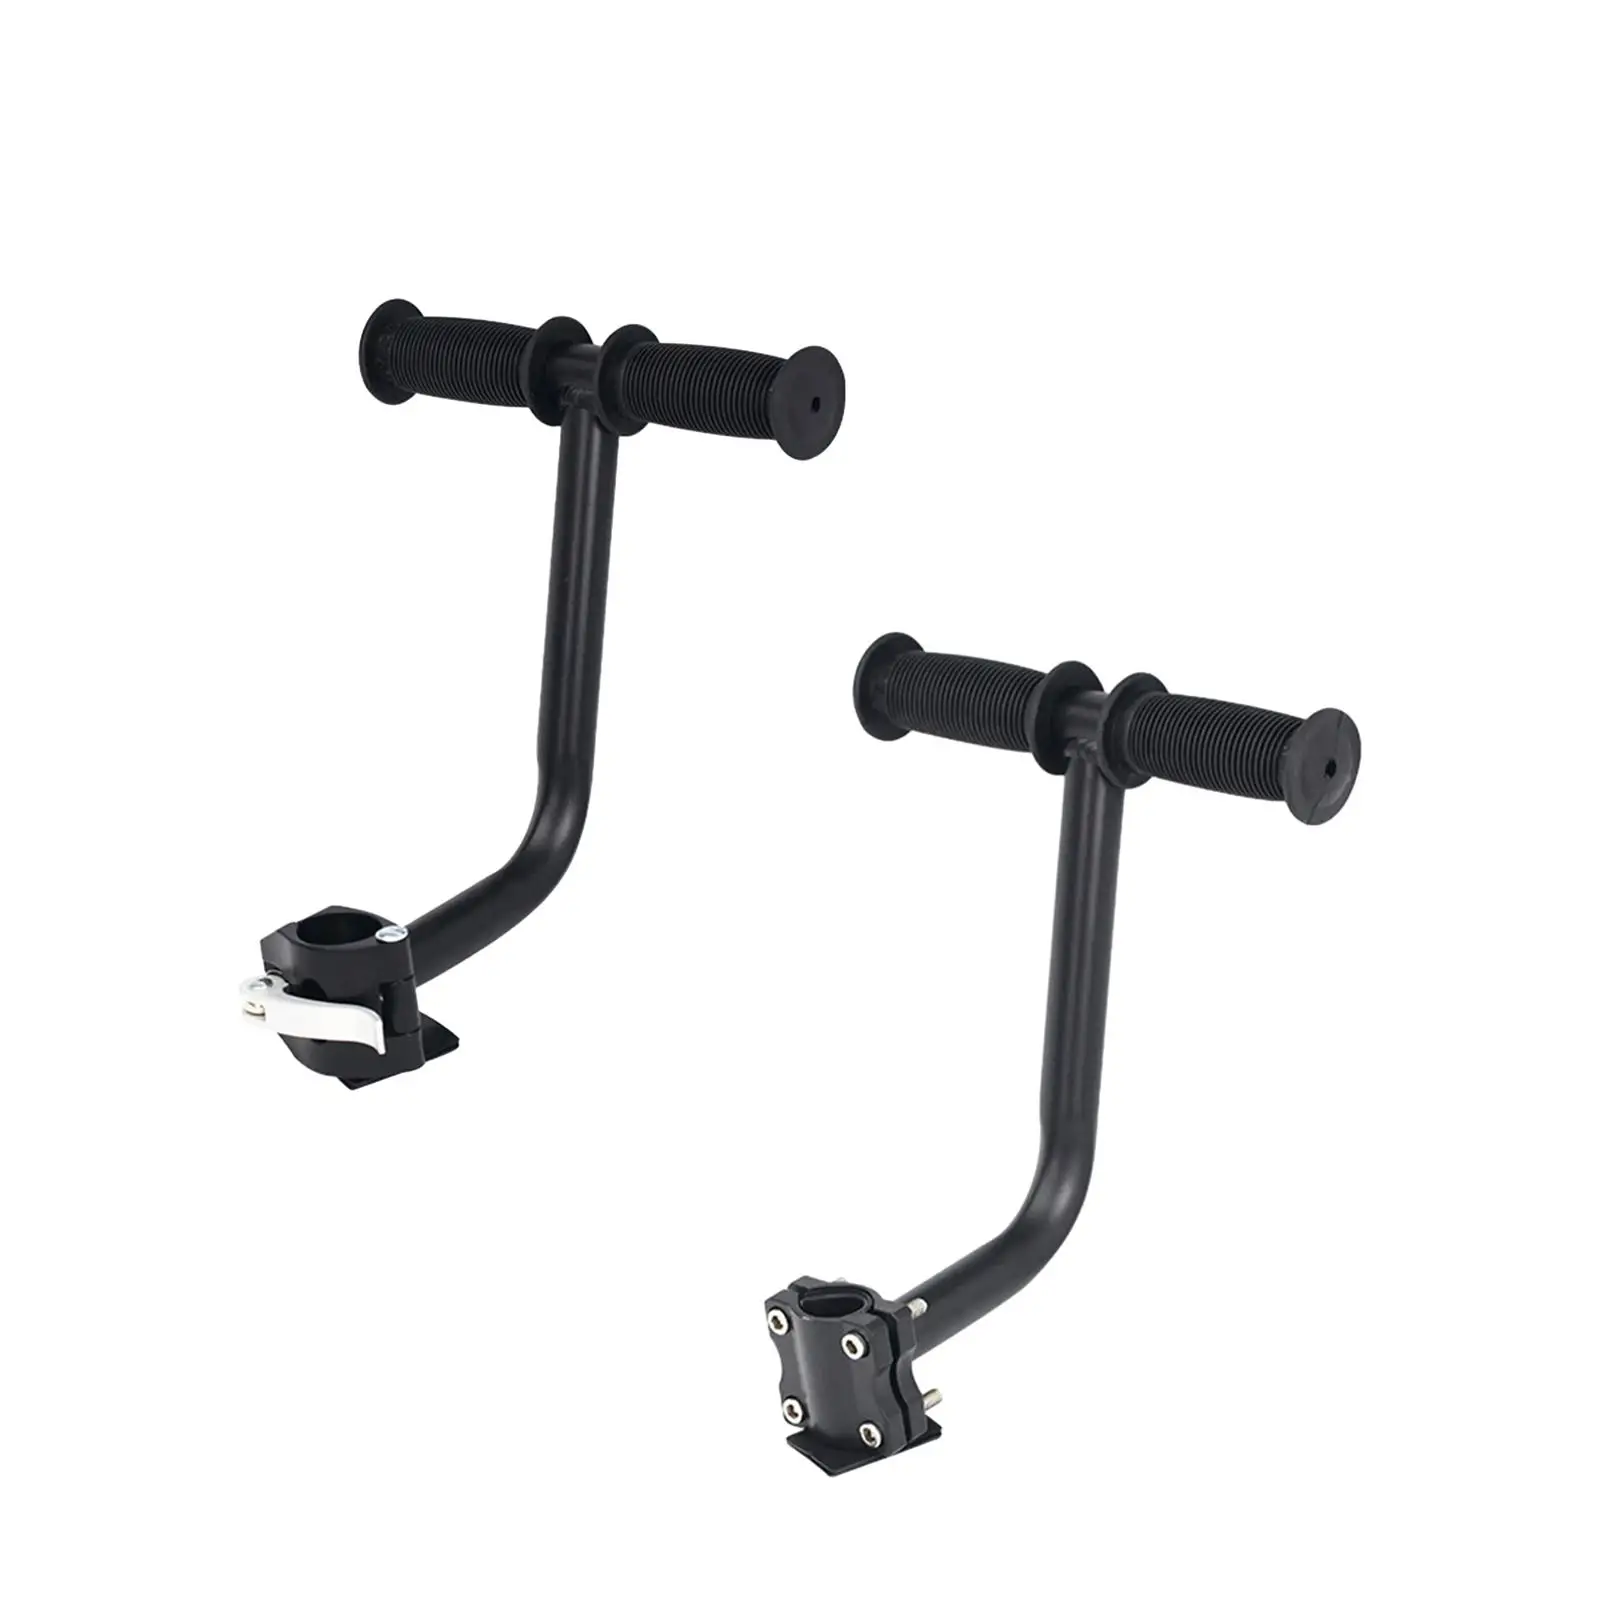 Bike Handrail Aluminum Alloy Bicycle Support Armrest Sturdy Bicycle Handrail